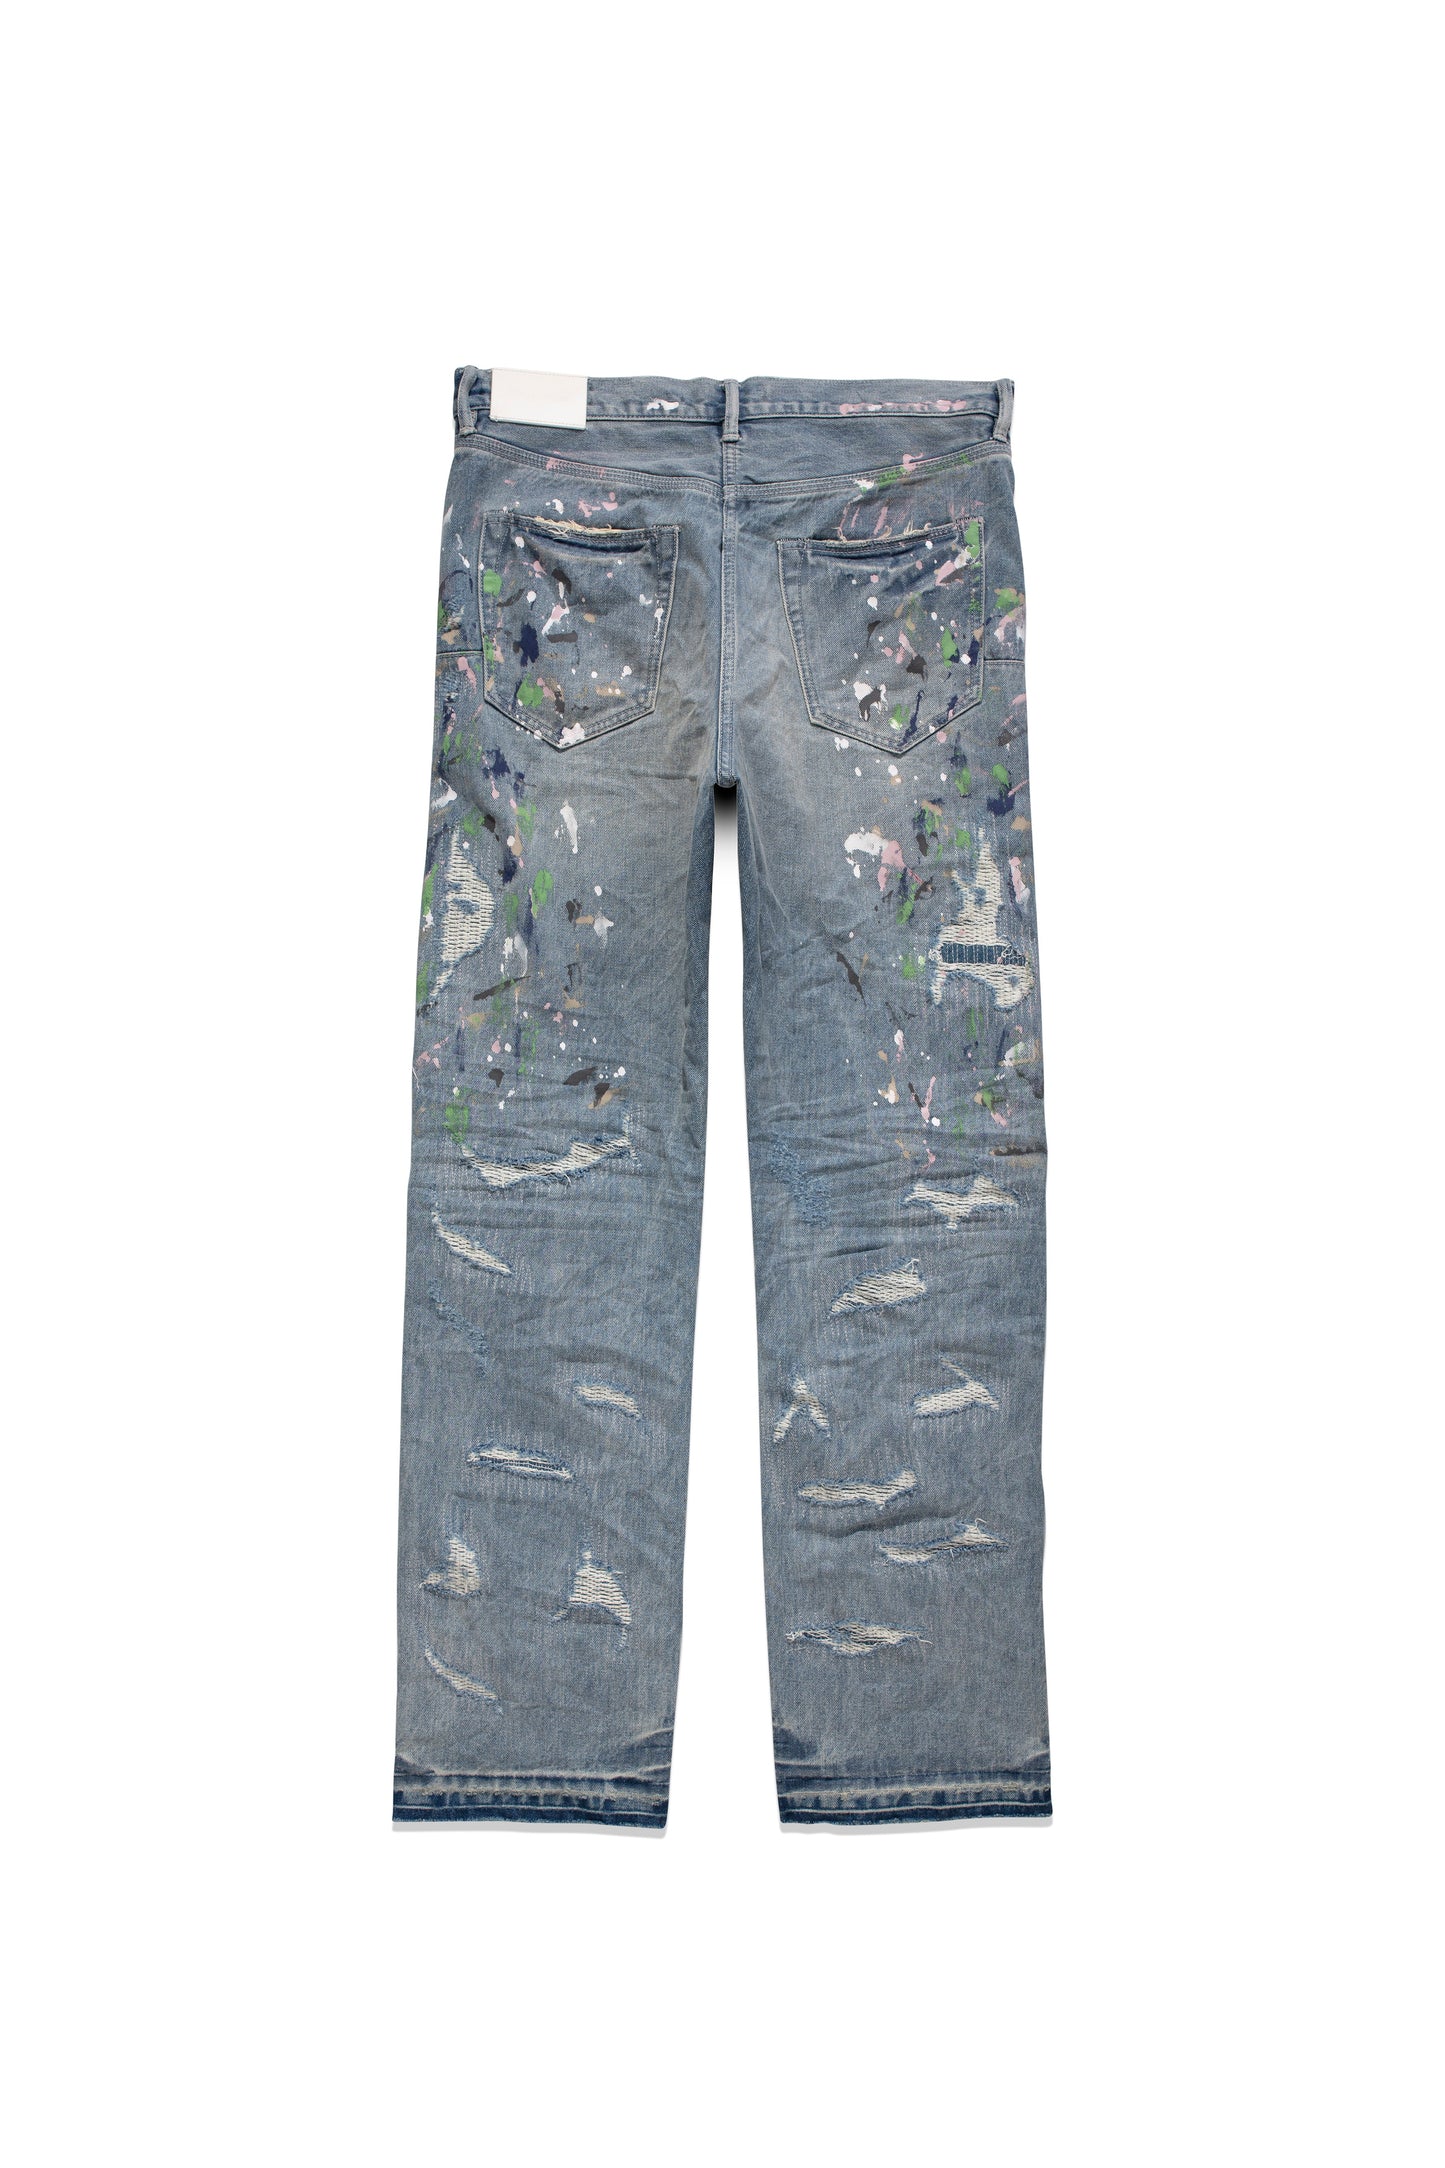 P011 MID RISE STRAIGHT LEG JEAN - Light Indigo With Heavy Repairs And Paint